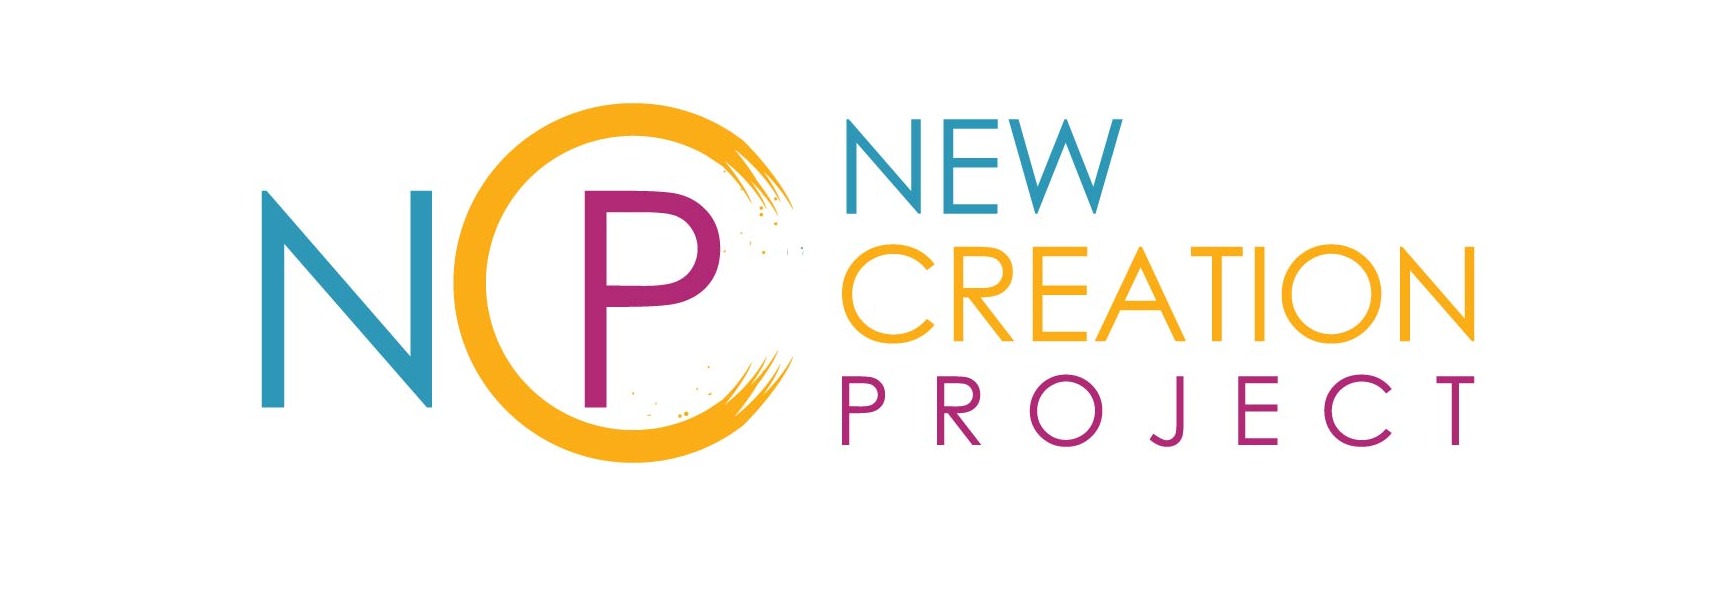 New Creation Project logo